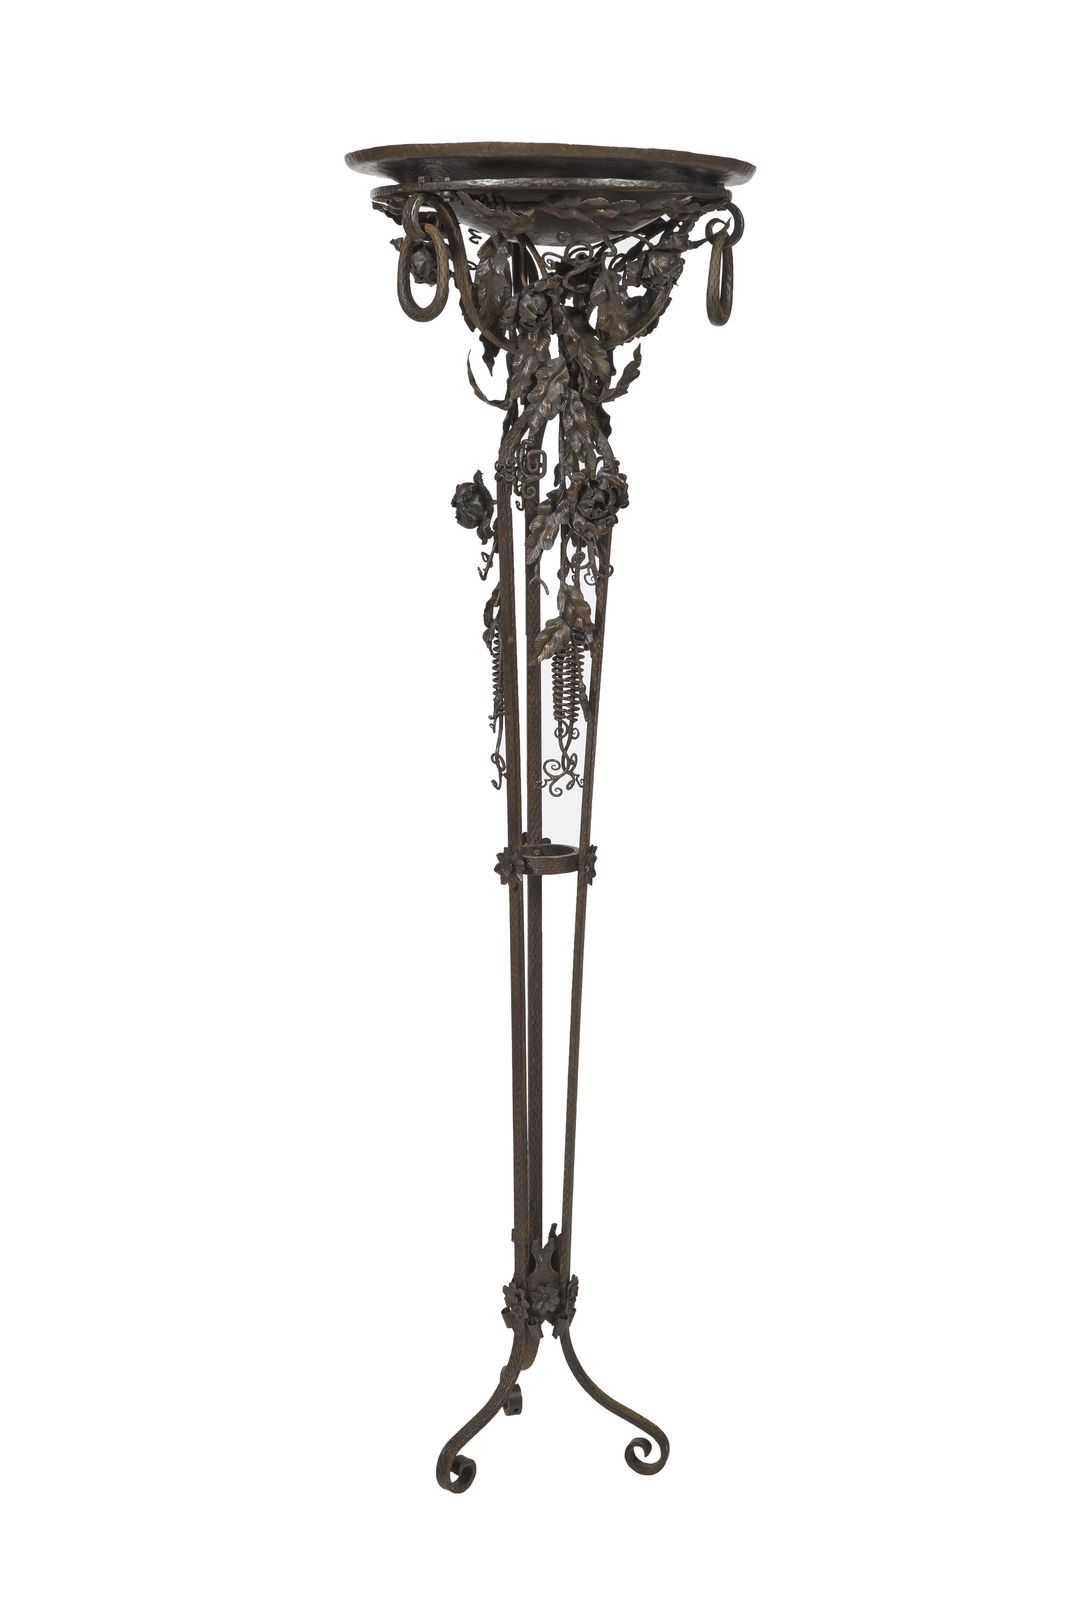 Null 100-P. VANDEPUTTE

Floor lamp in wrought iron with rich decoration of flowe&hellip;